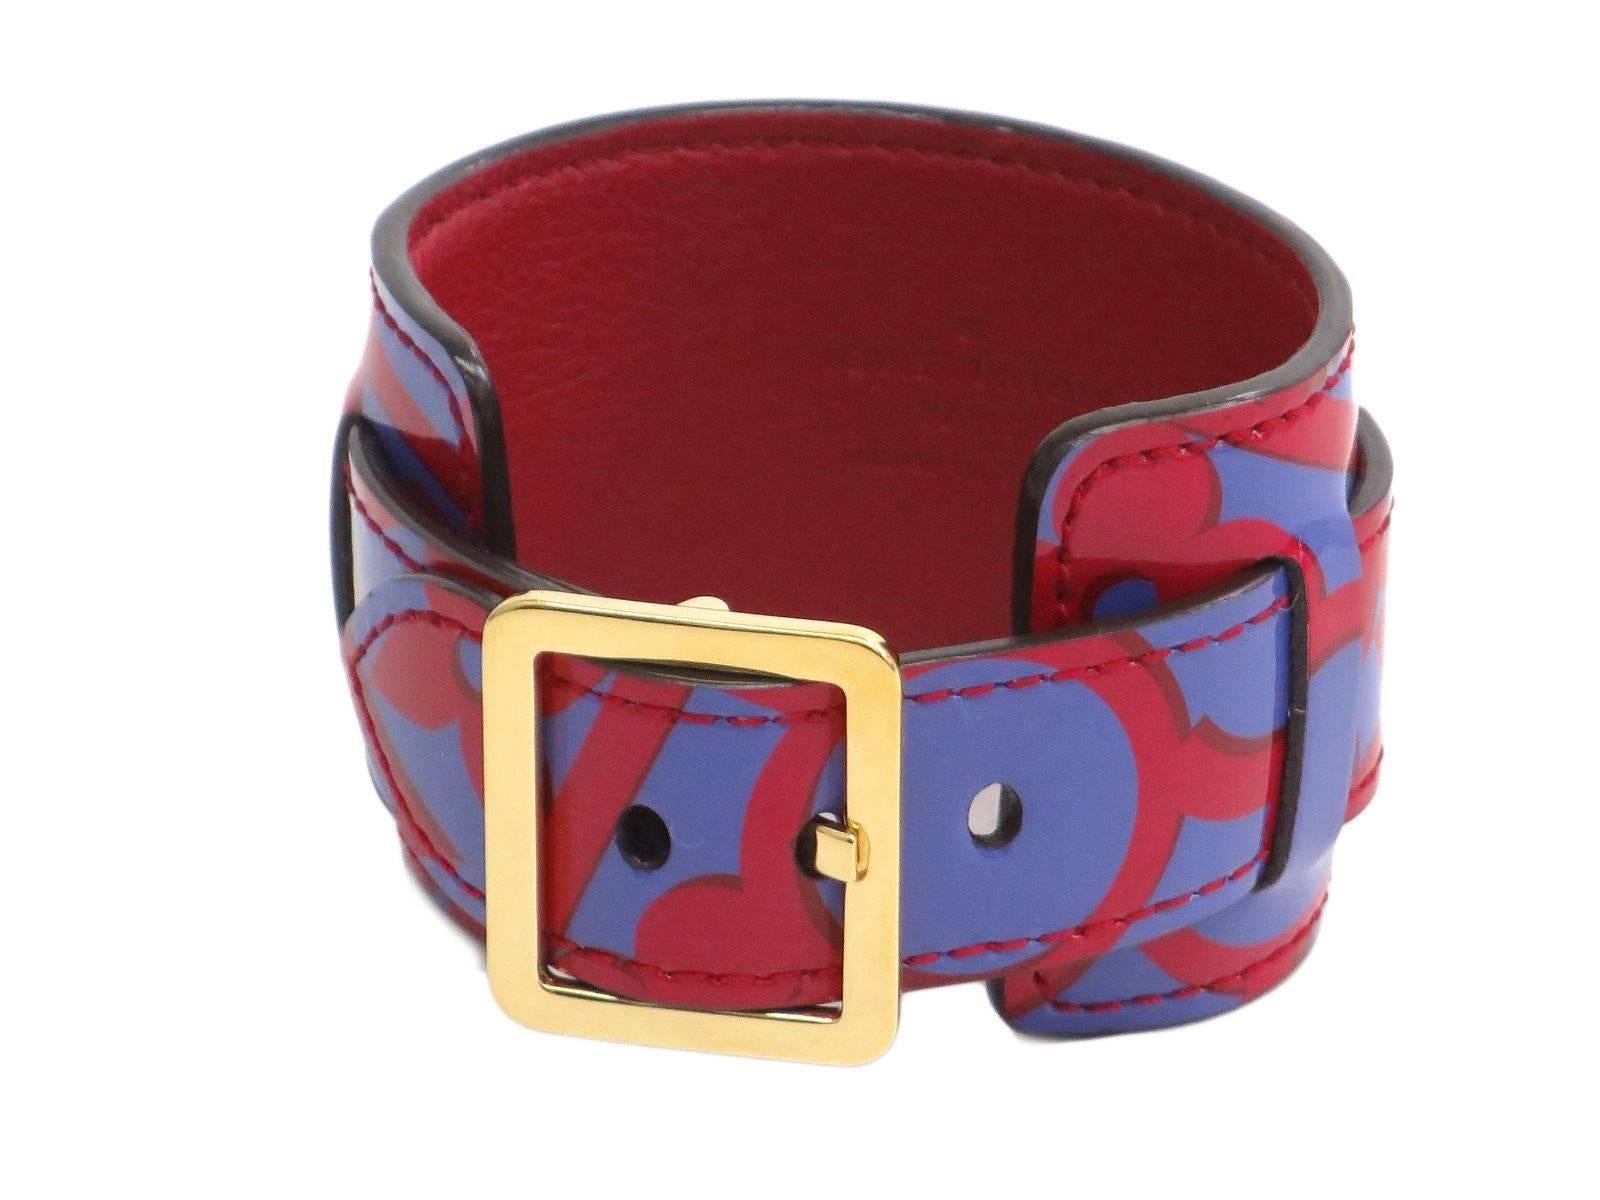 CURATOR'S NOTES

Vernis patent leather
Gold hardware
Buckle closure
Made in Spain
Date code CA4163
Width 1.6